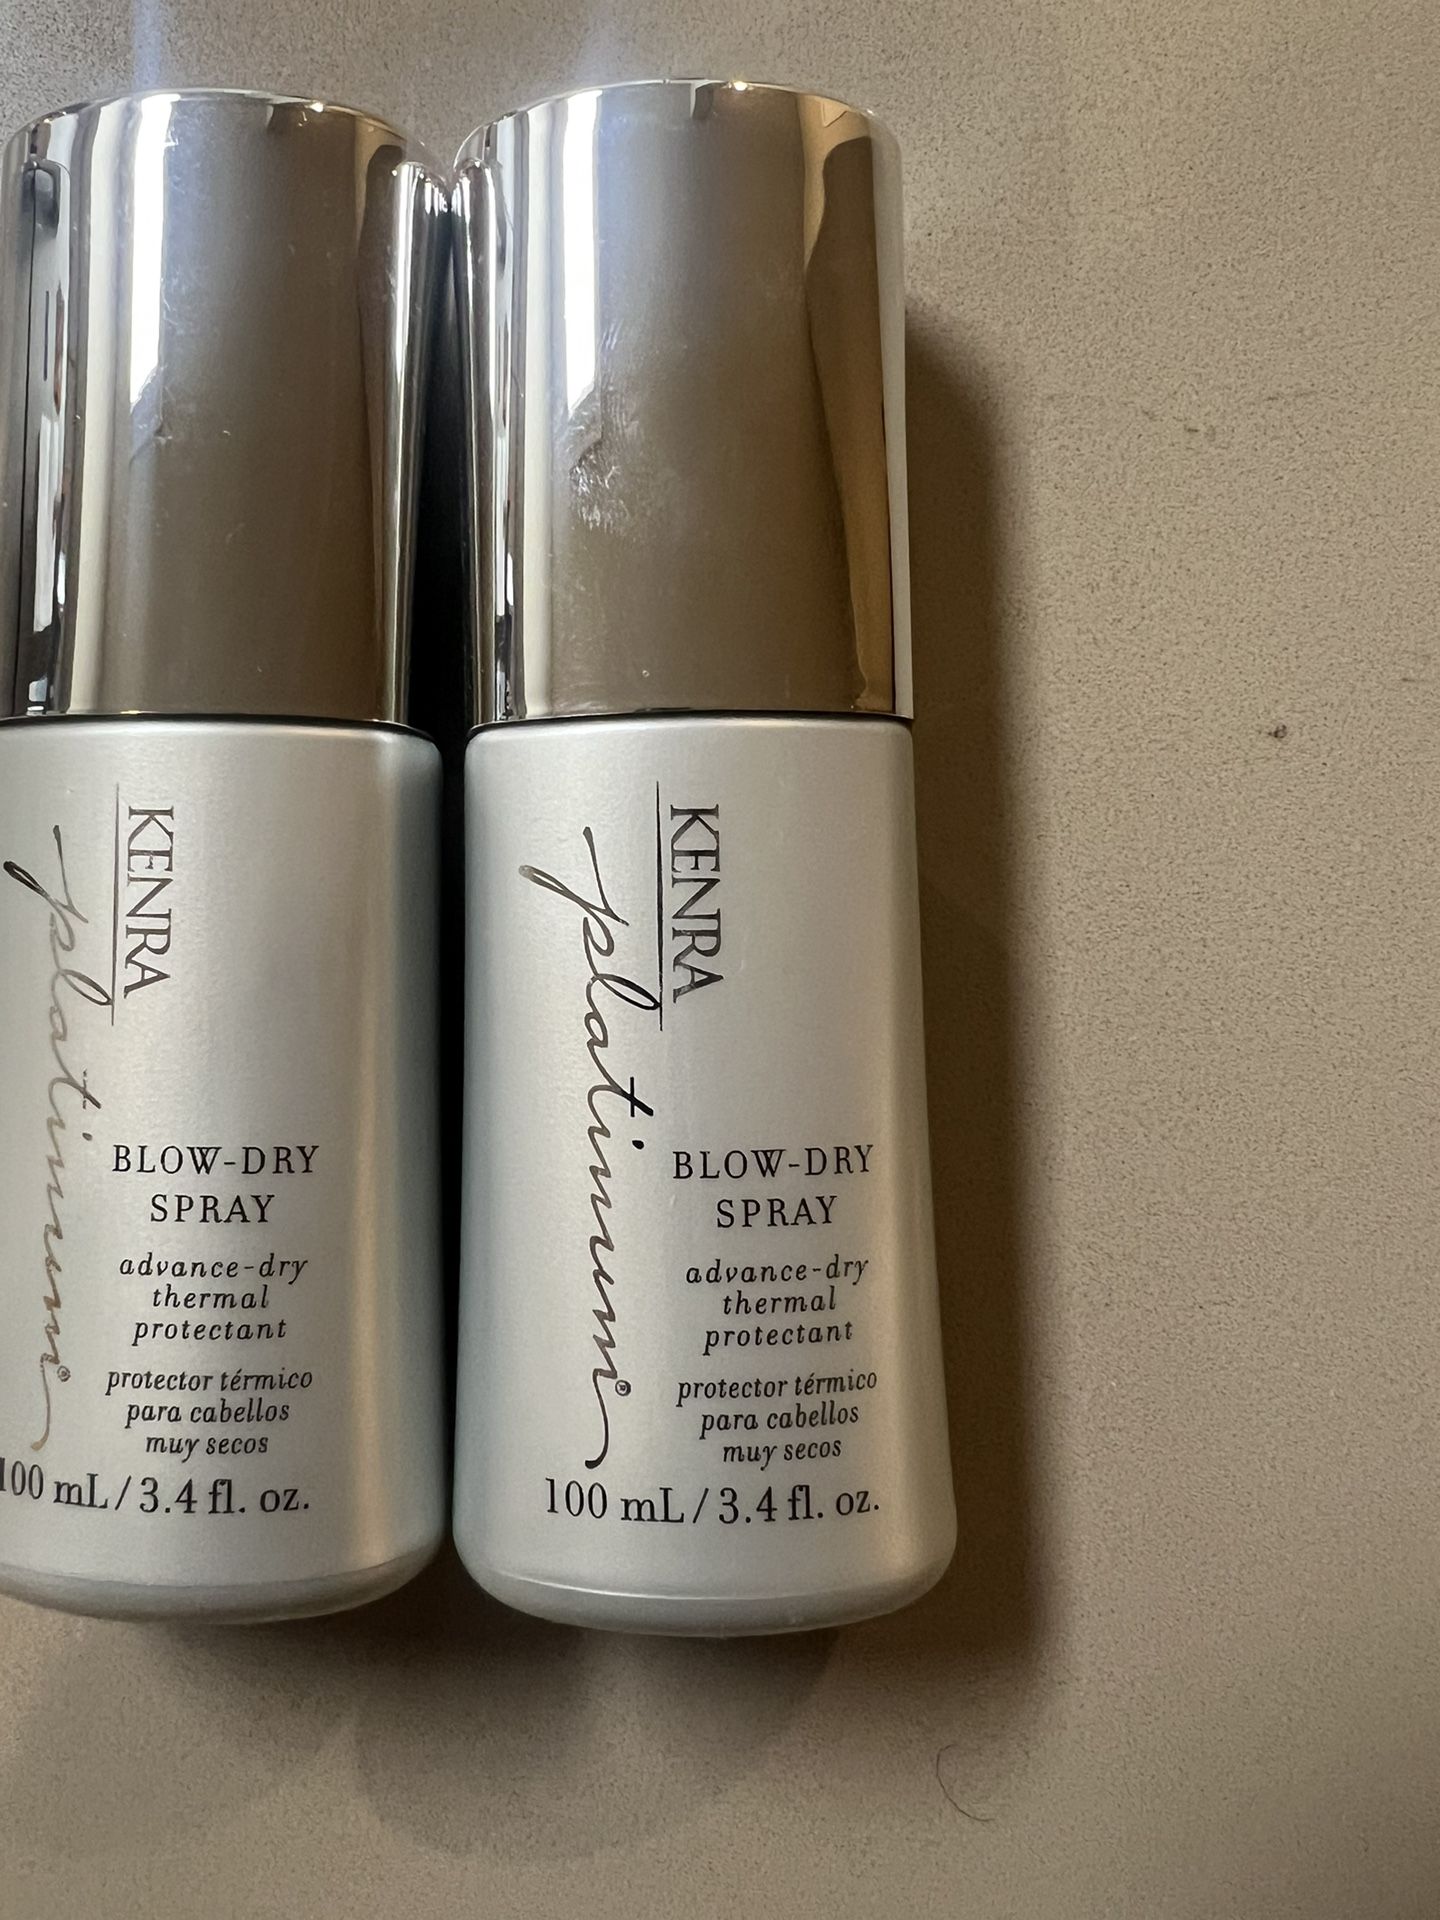 Kenra Platinum Blow Dry Spray-advance- Dry Thermal Protectant 100 ml $10  Each 